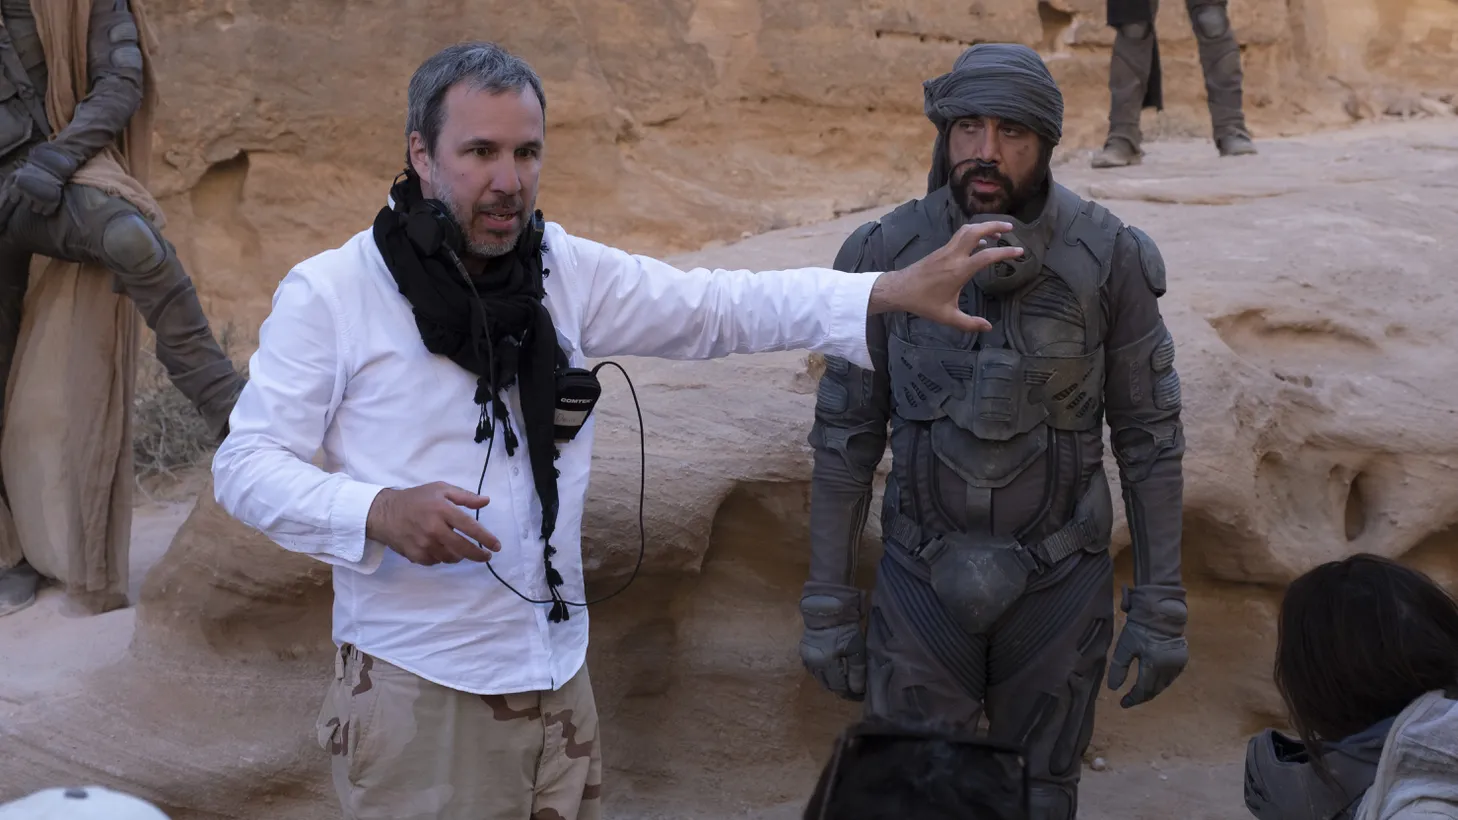 Director Denis Villeneuve wanted to make a film version of “Dune” for decades. It’s now up for 10 Academy Awards, including Best Picture.